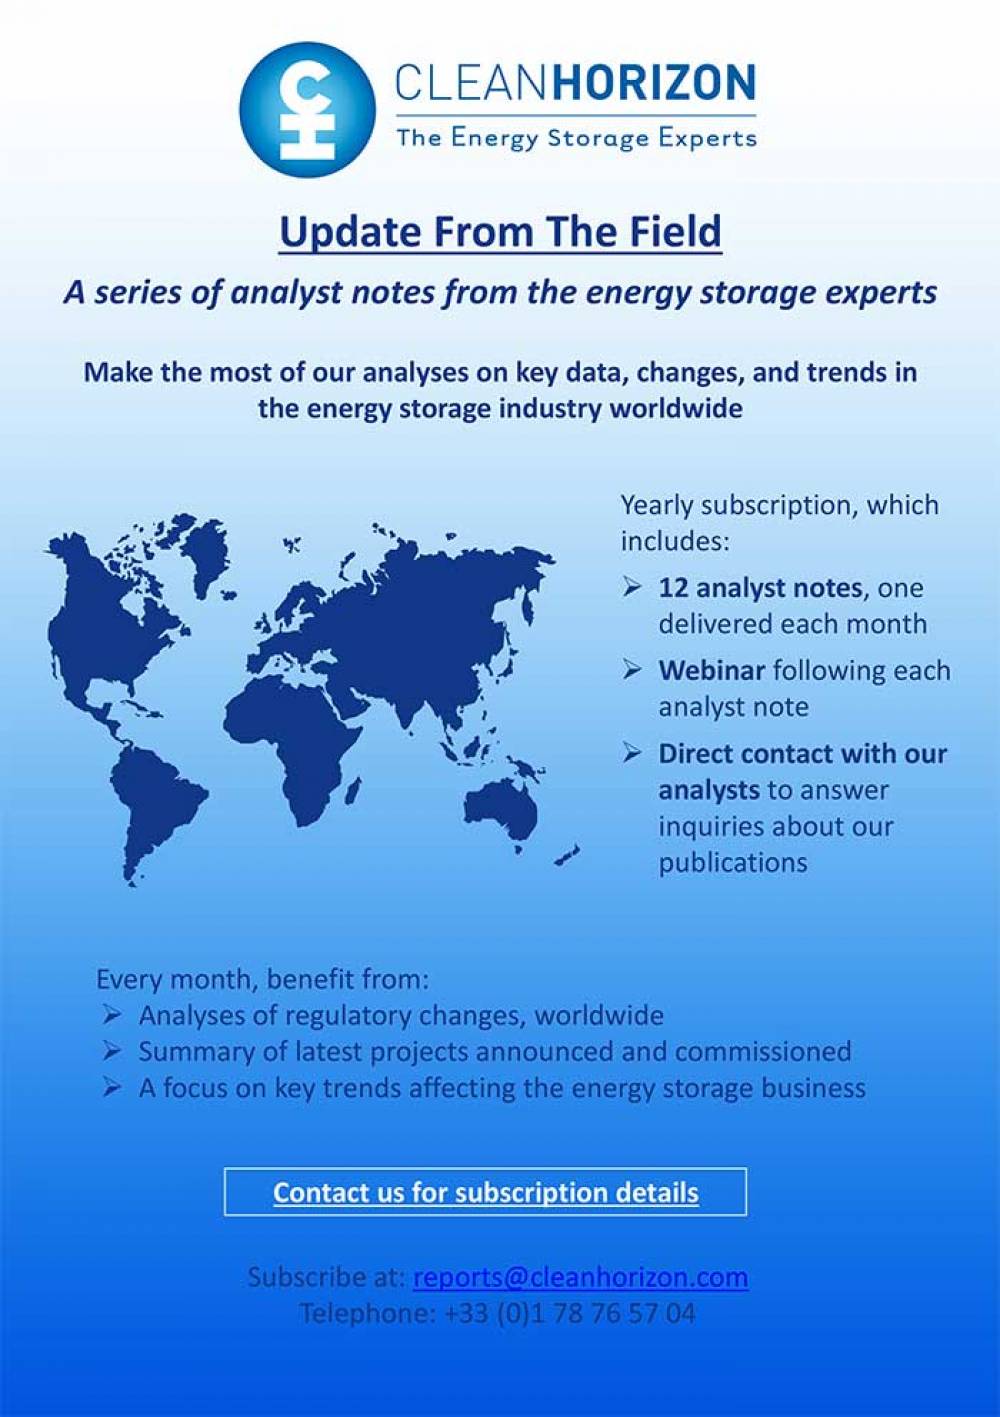 Update From The Field January 2018: Opportunities for Energy Storage in the Northeast United States